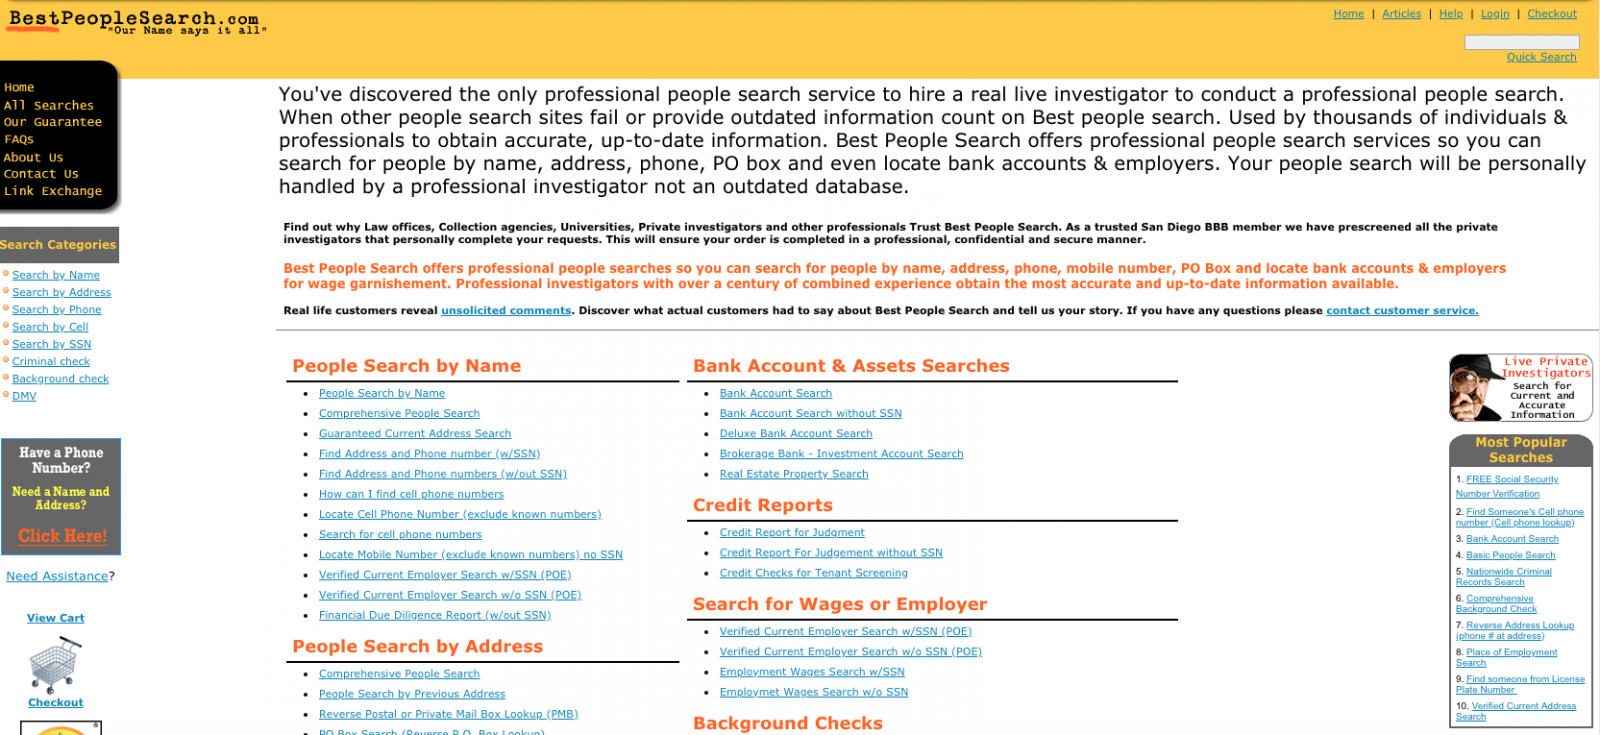 BestPeopleSearch.com in 2008